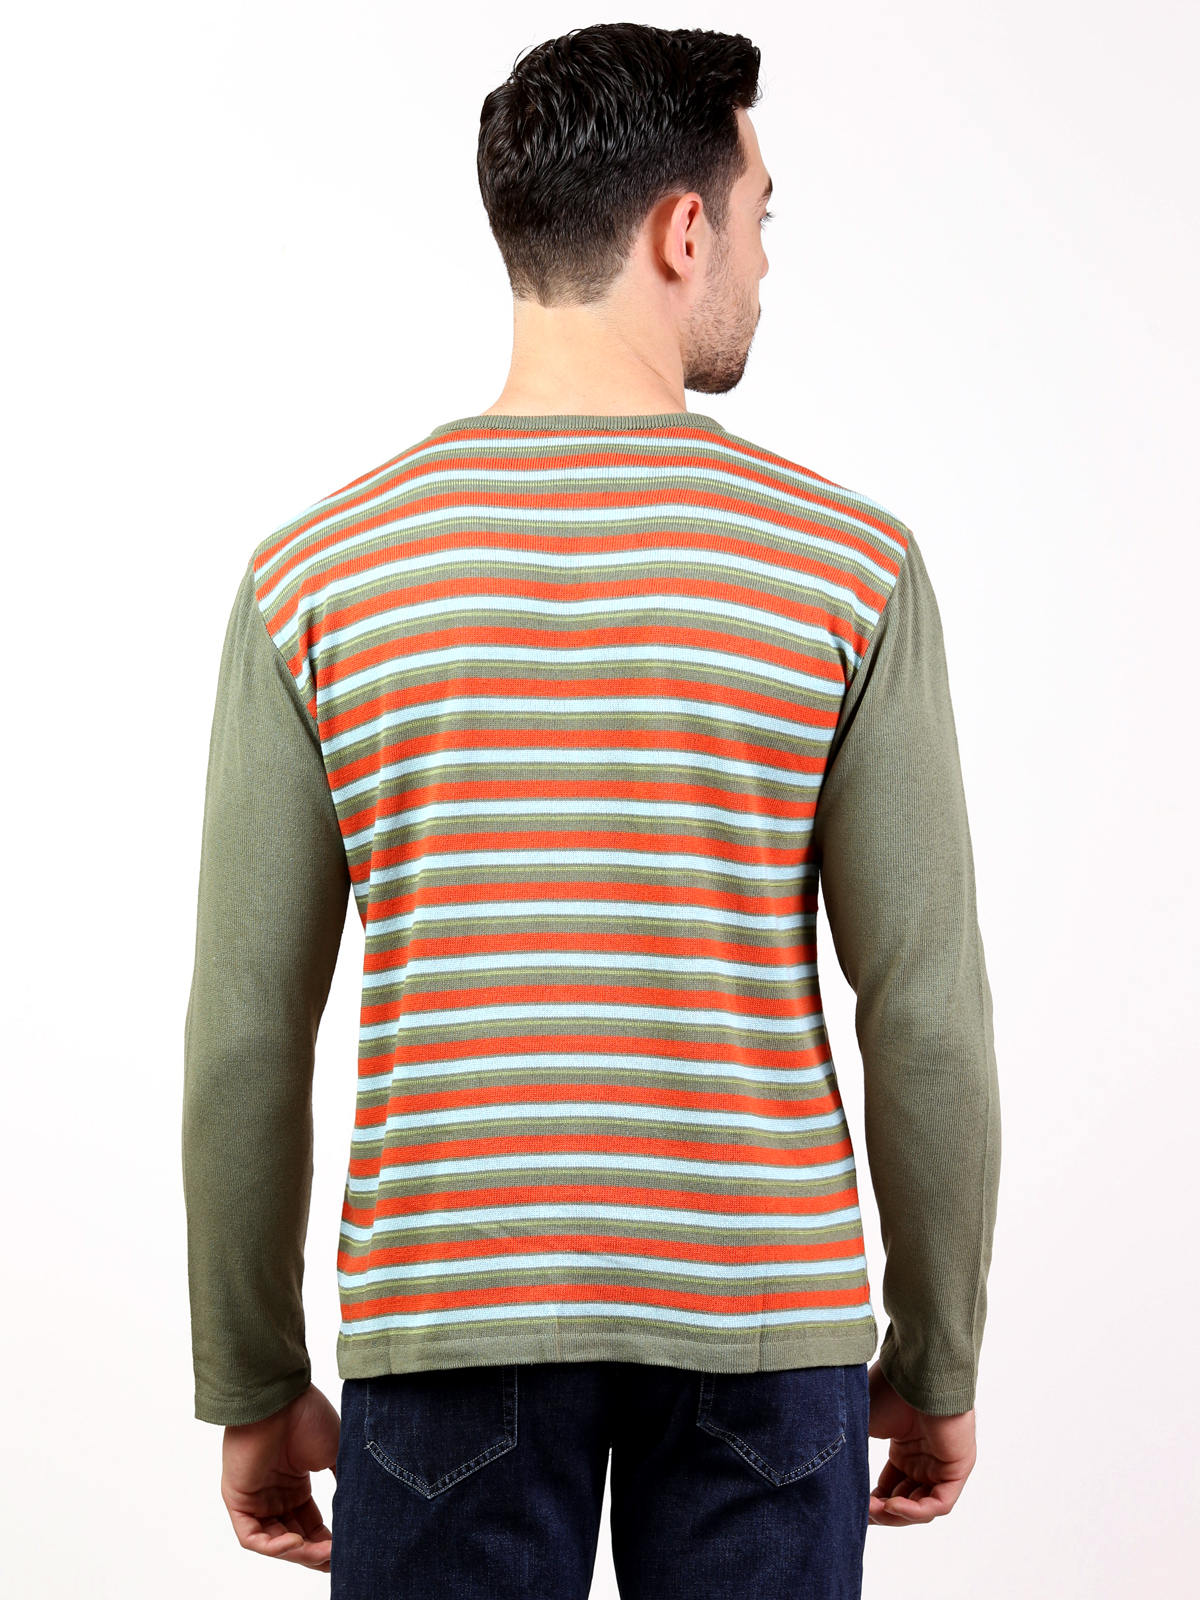  knitted blouse with colored stripes  - 35090 € 6.75 img2